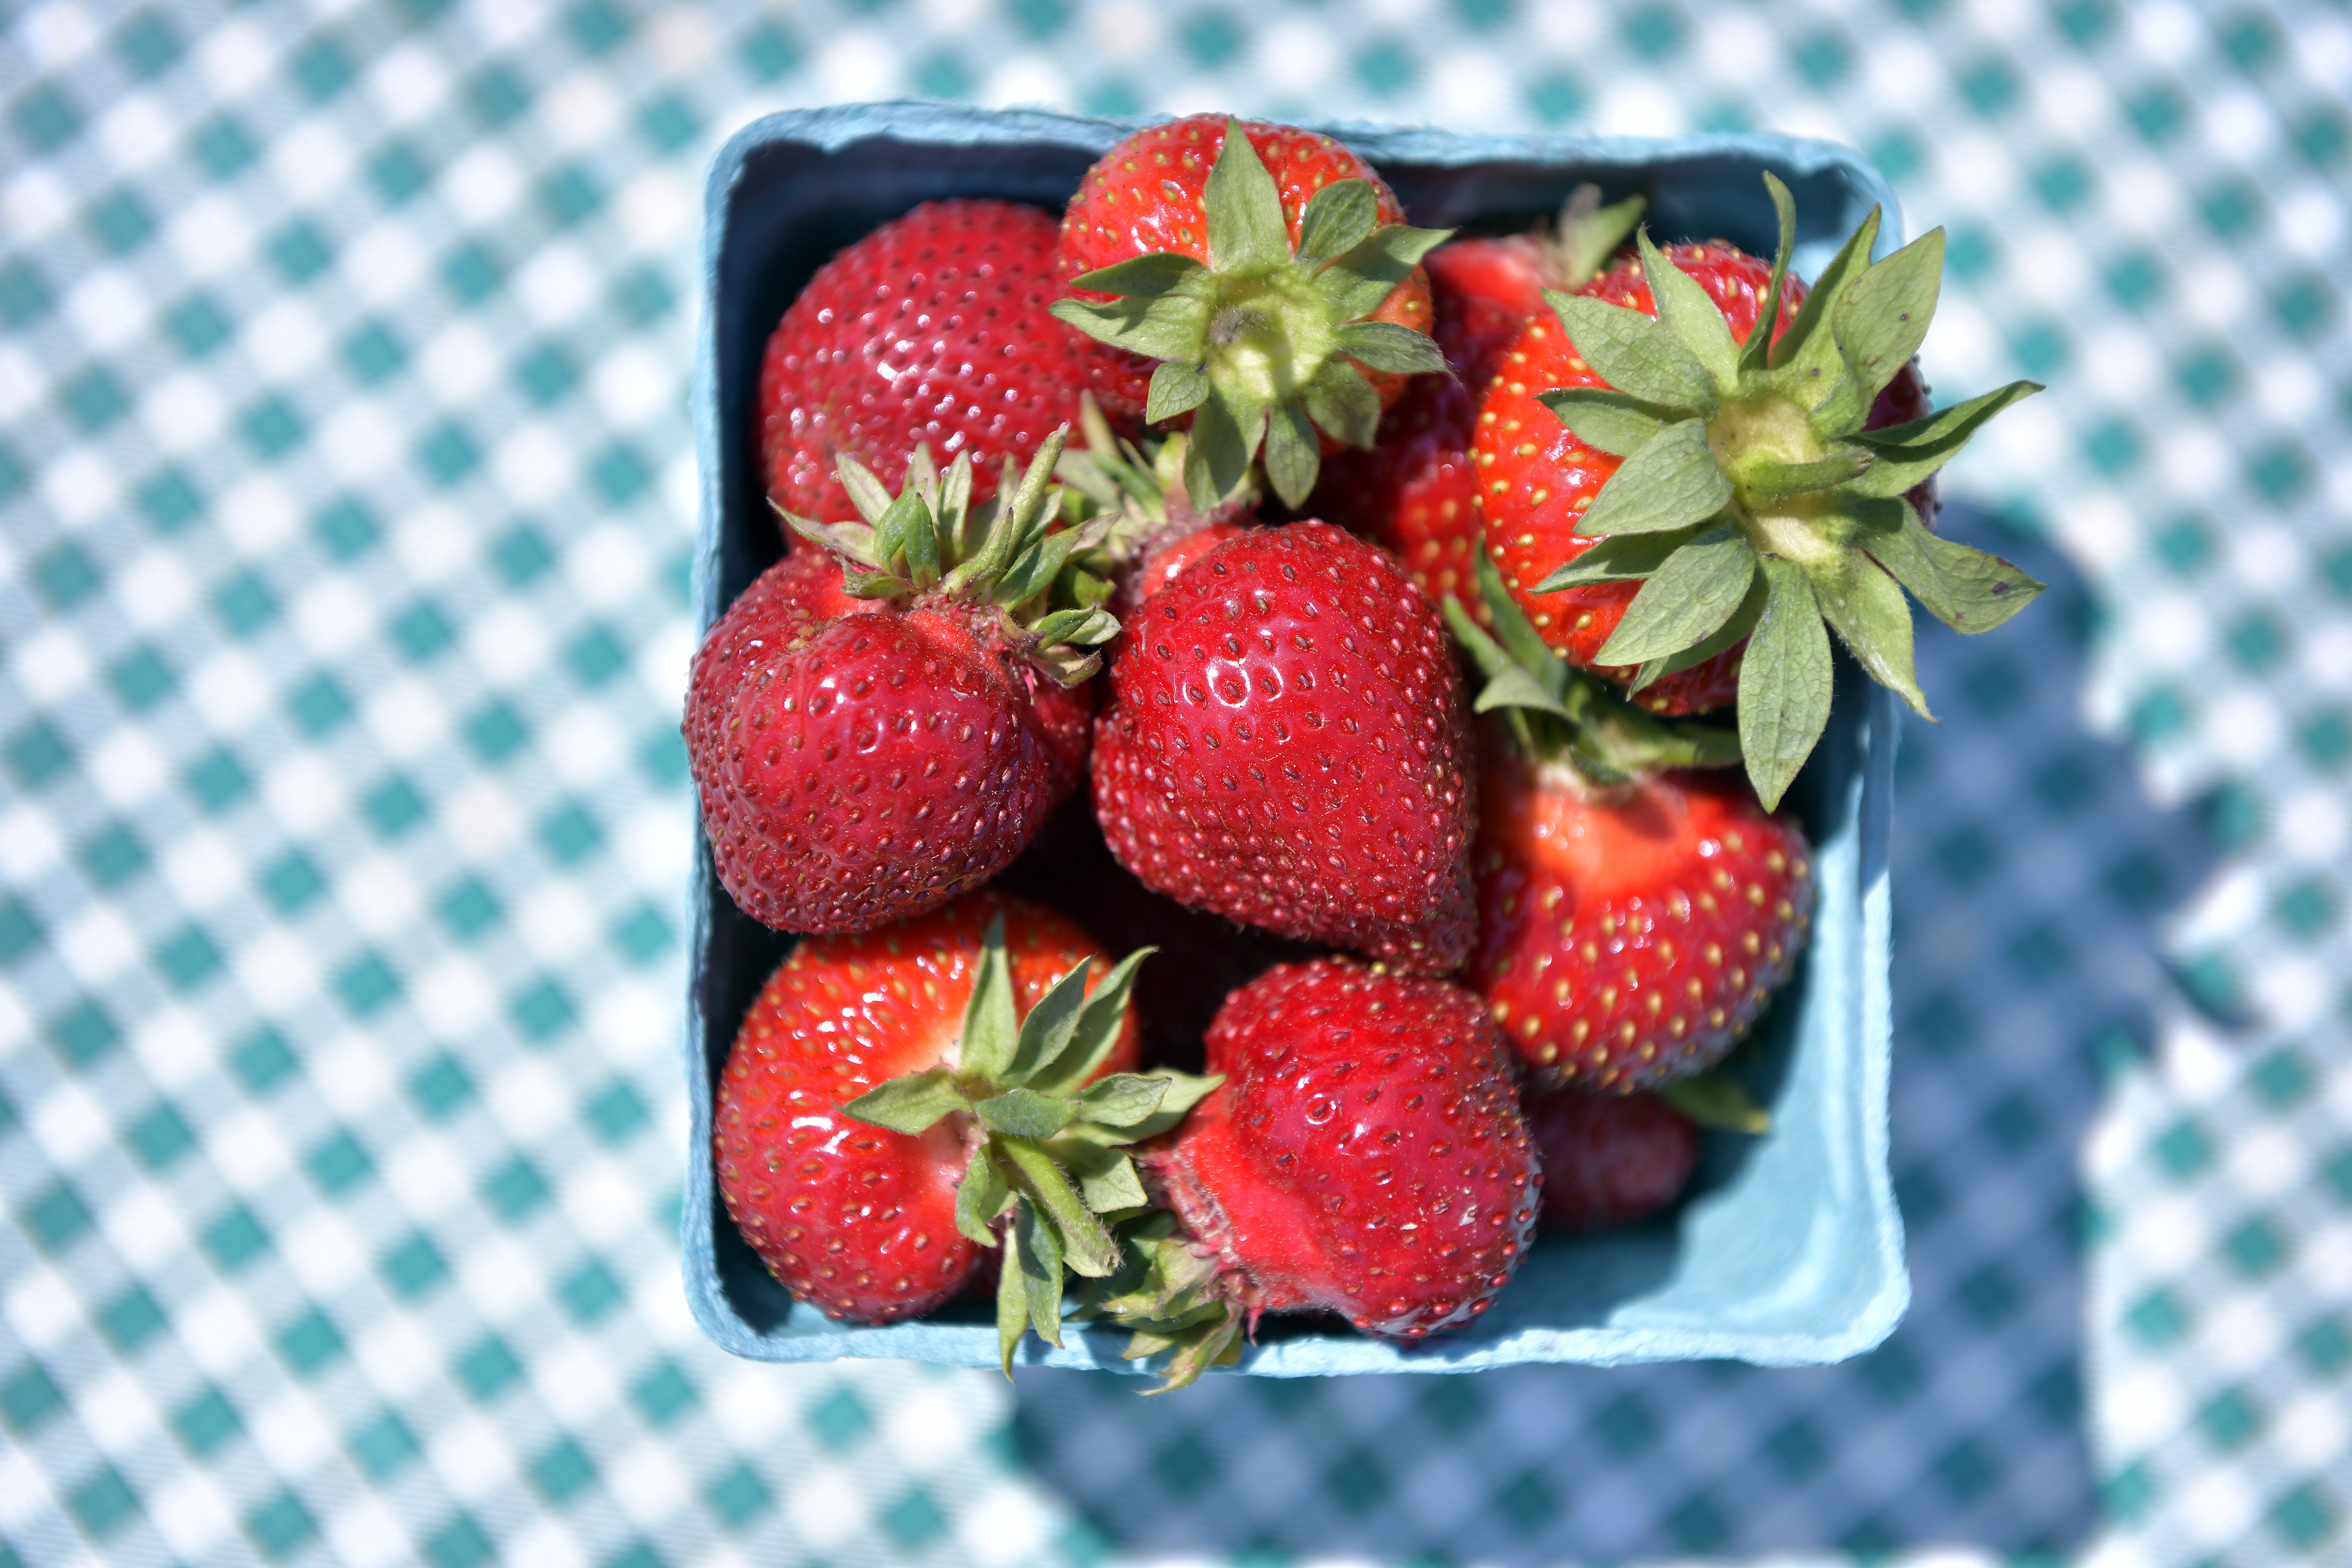 Where to Pick Your Own Strawberries in NJ This Year